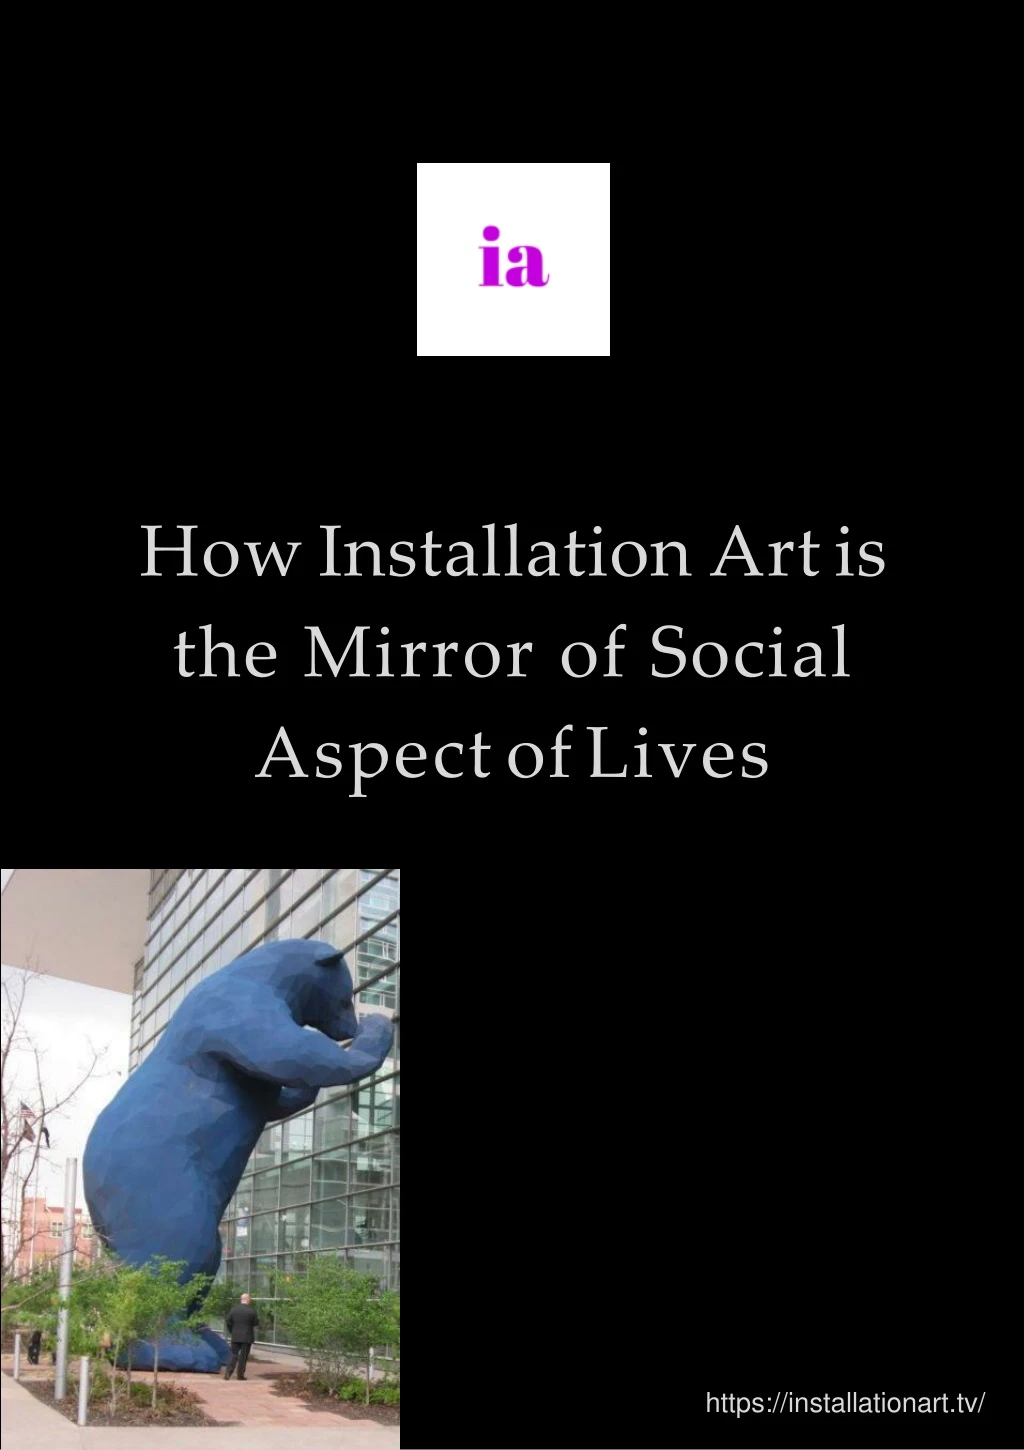 how installation art is the mirror of social aspect of lives